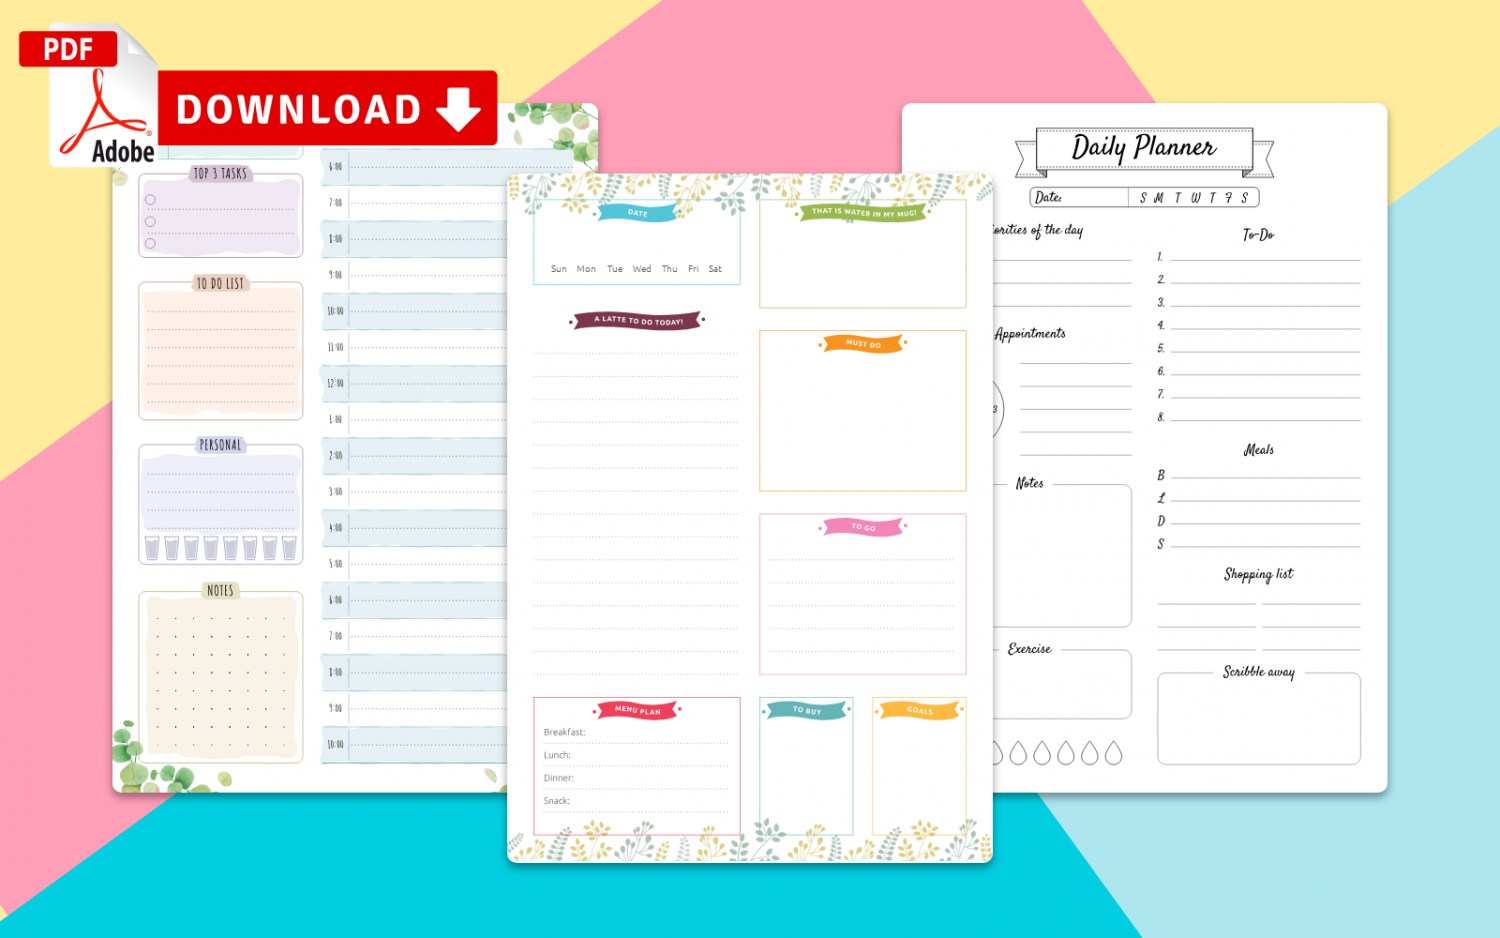 Free planner download ad console for windows 10 download